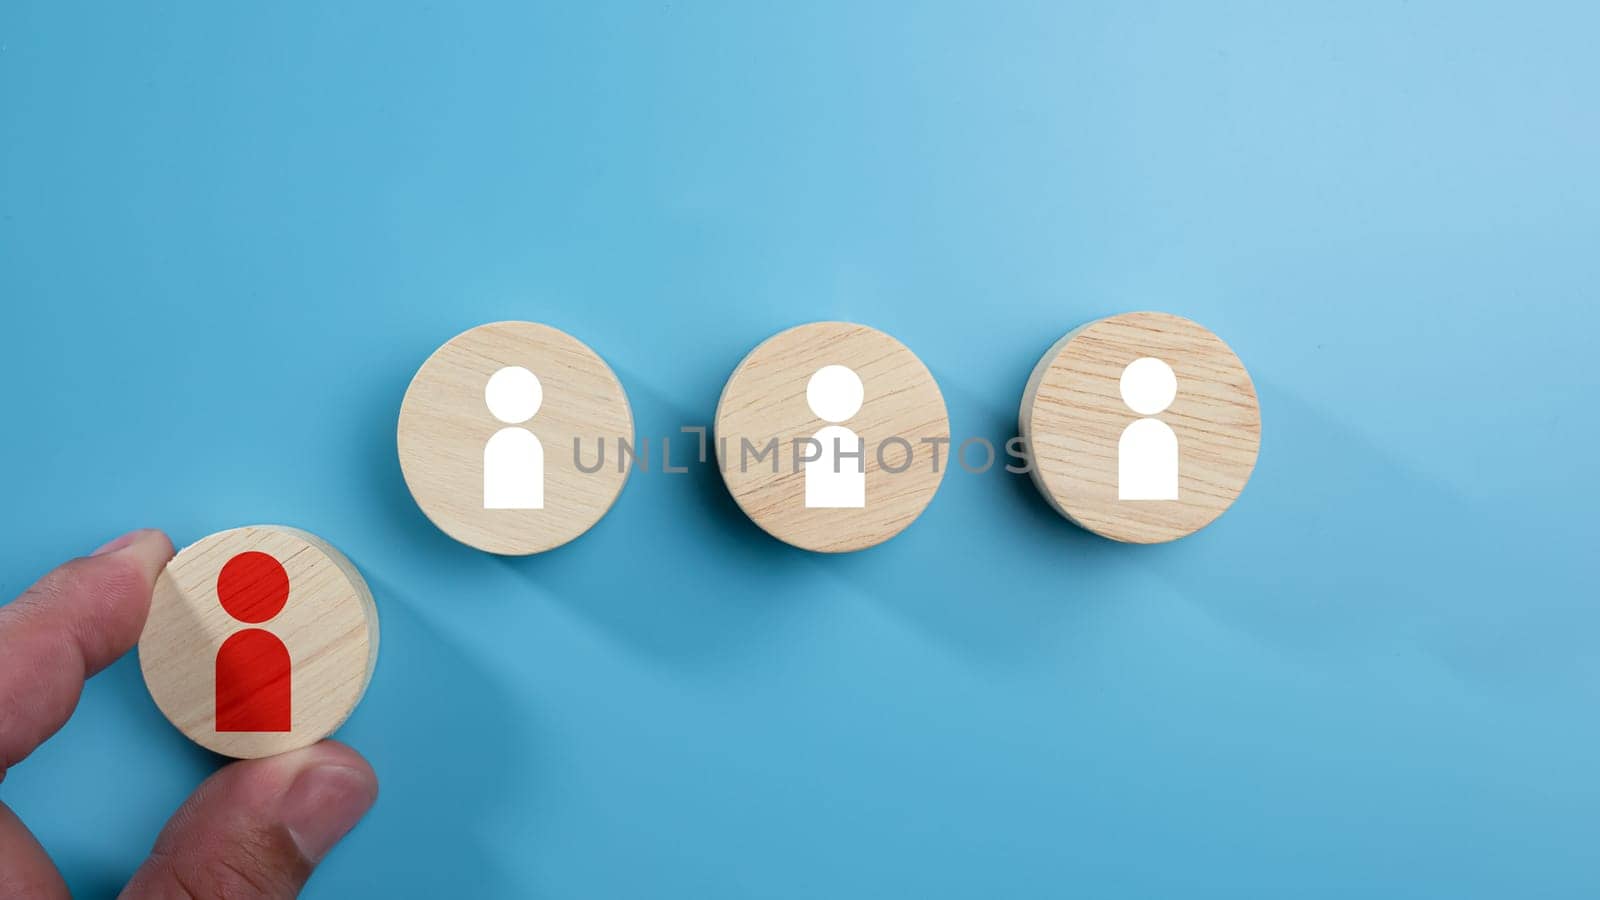 Human Resource Management, Business hiring and recruitment selection, Human Resource Management. Focus human icon on circular wooden board, Choice of employee leader crowd, leadership concept. by Unimages2527